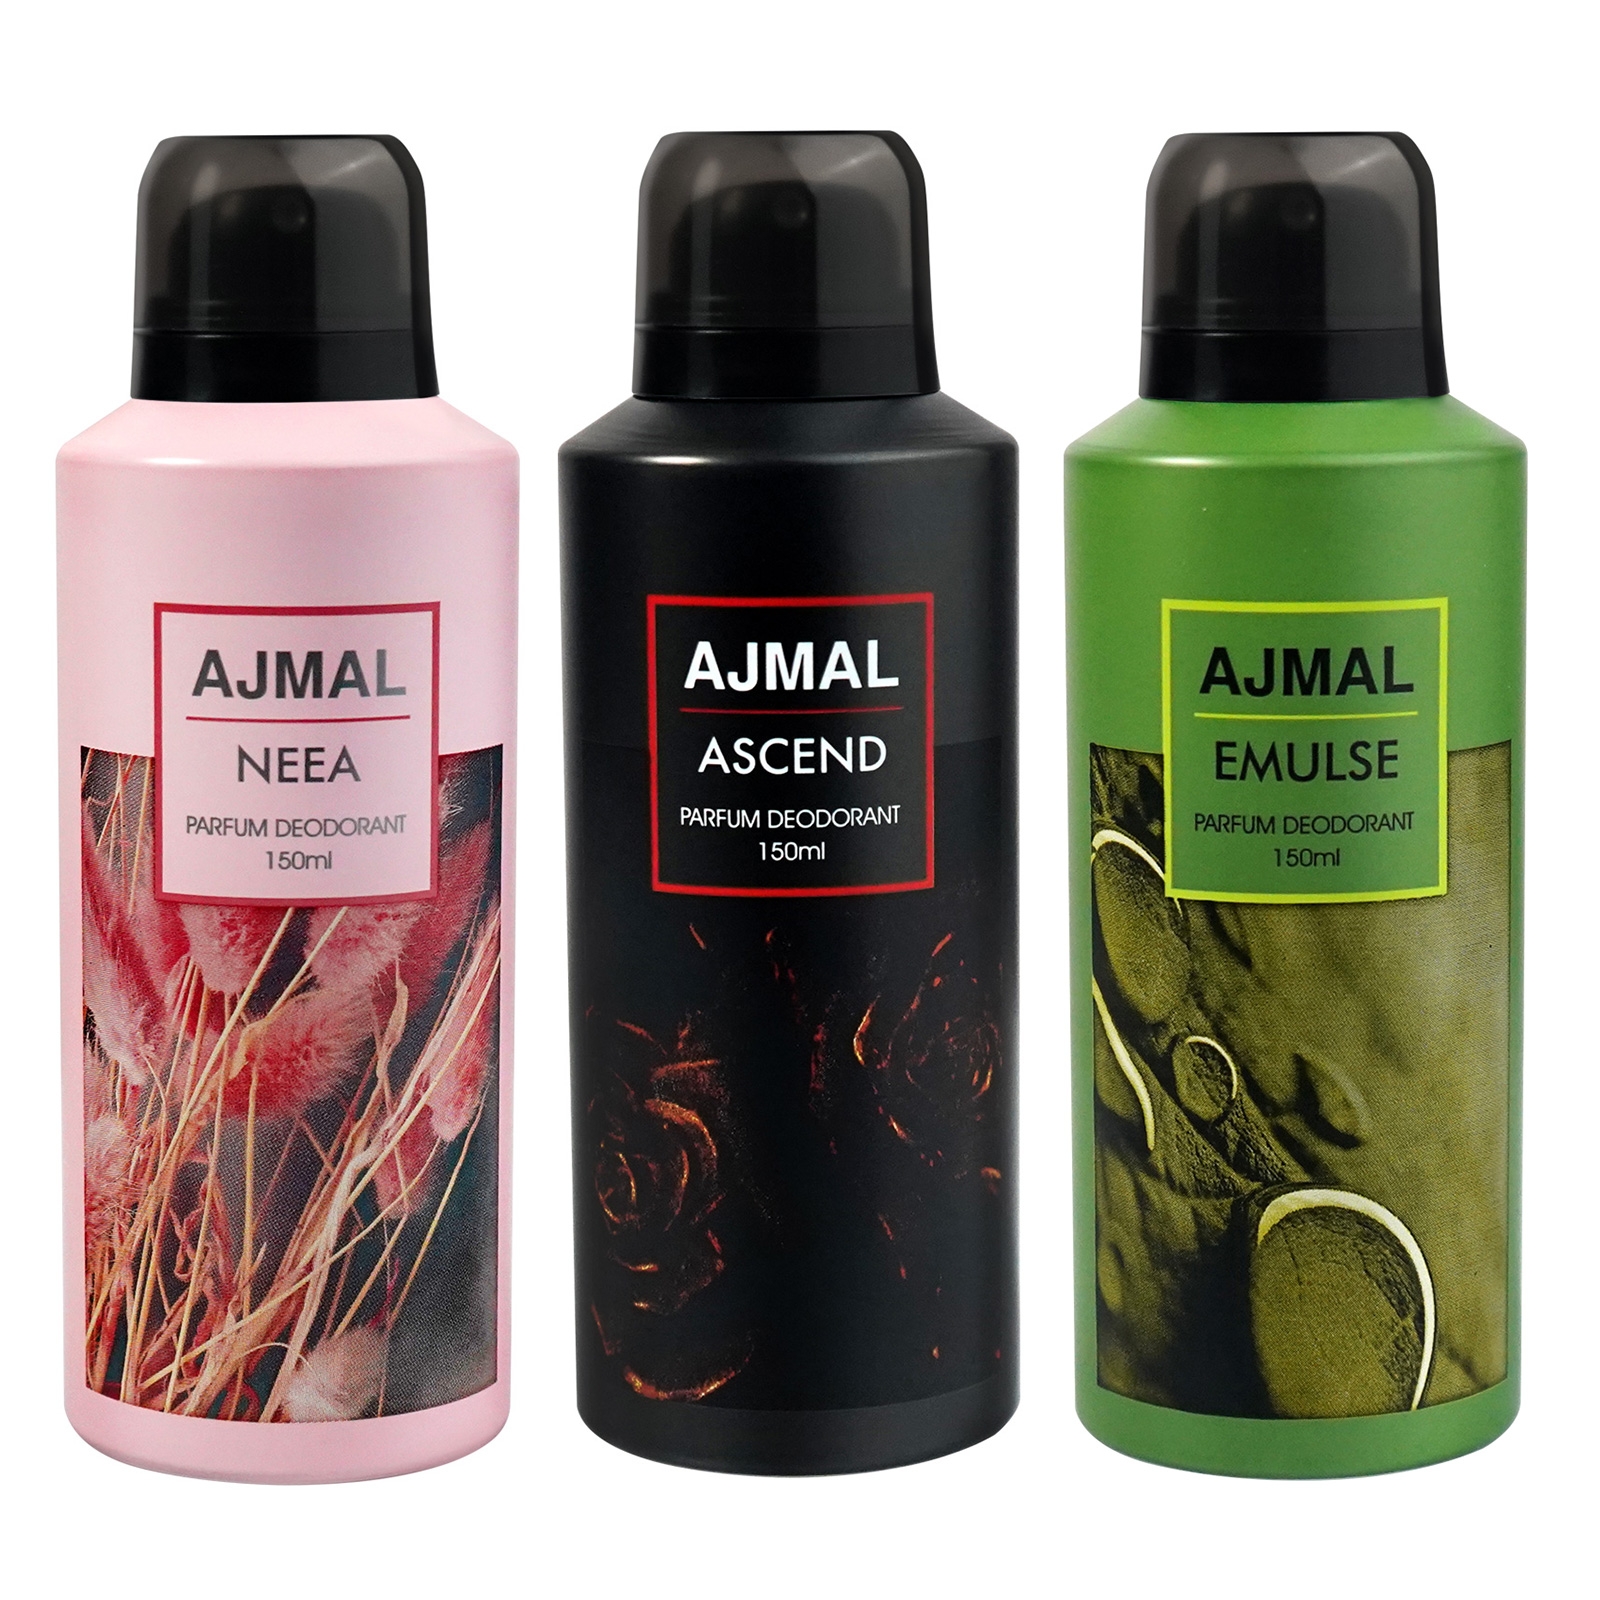 Ajmal Neea, Ascend and Emulse Deodorant Perfume 150ML Each Long Lasting Spray Party Wear Gift For Men and Women Online Exclusive